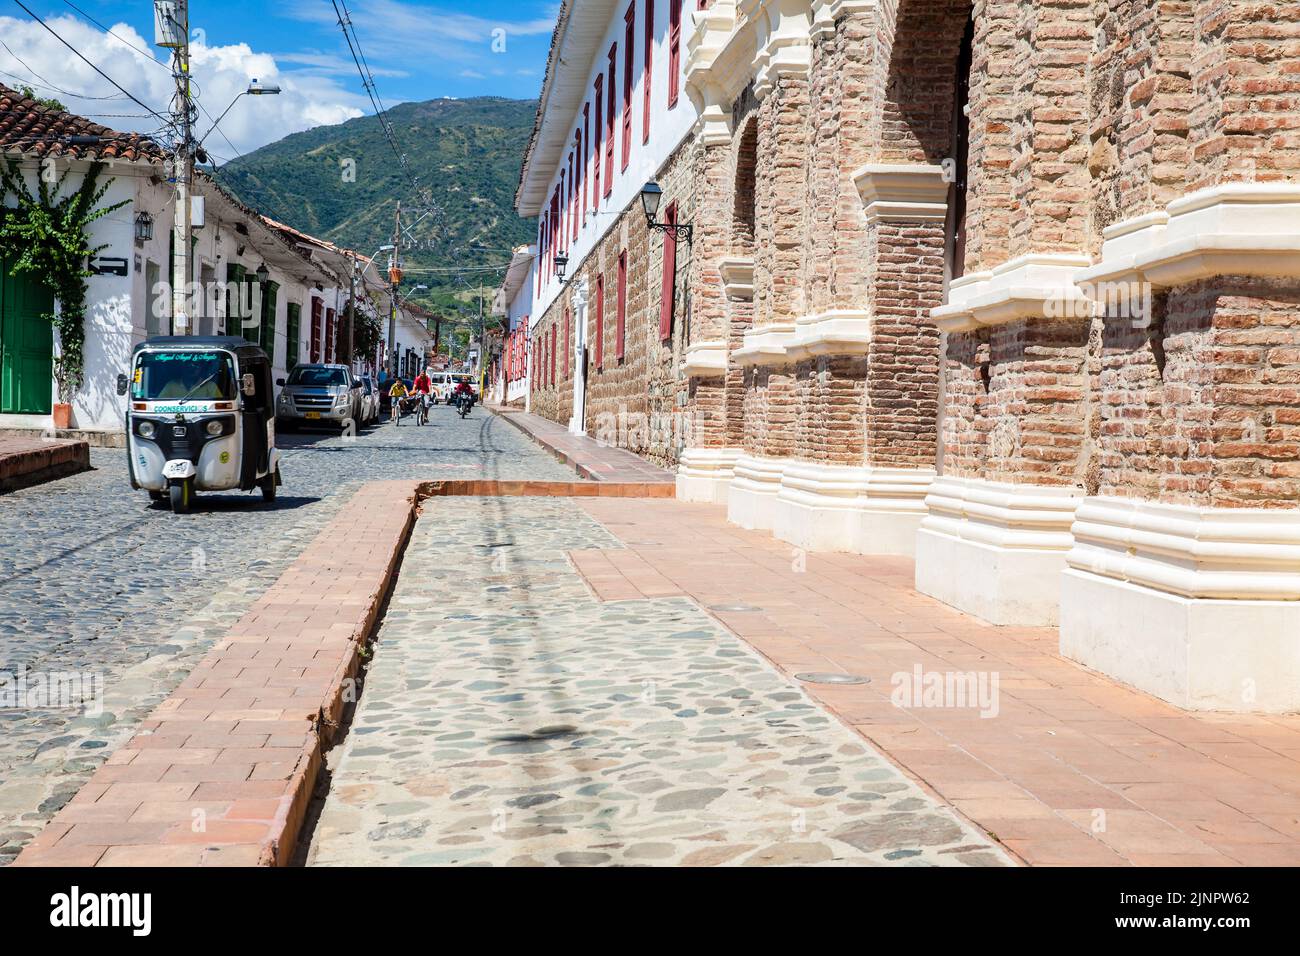 SANTA FE DE ANTIOQUIA, , COLOMBIA - NOVEMBER, 2017: Beautiful antique streets of the colonial town of Santa Fe de Antioquia in Colombia Stock Photo